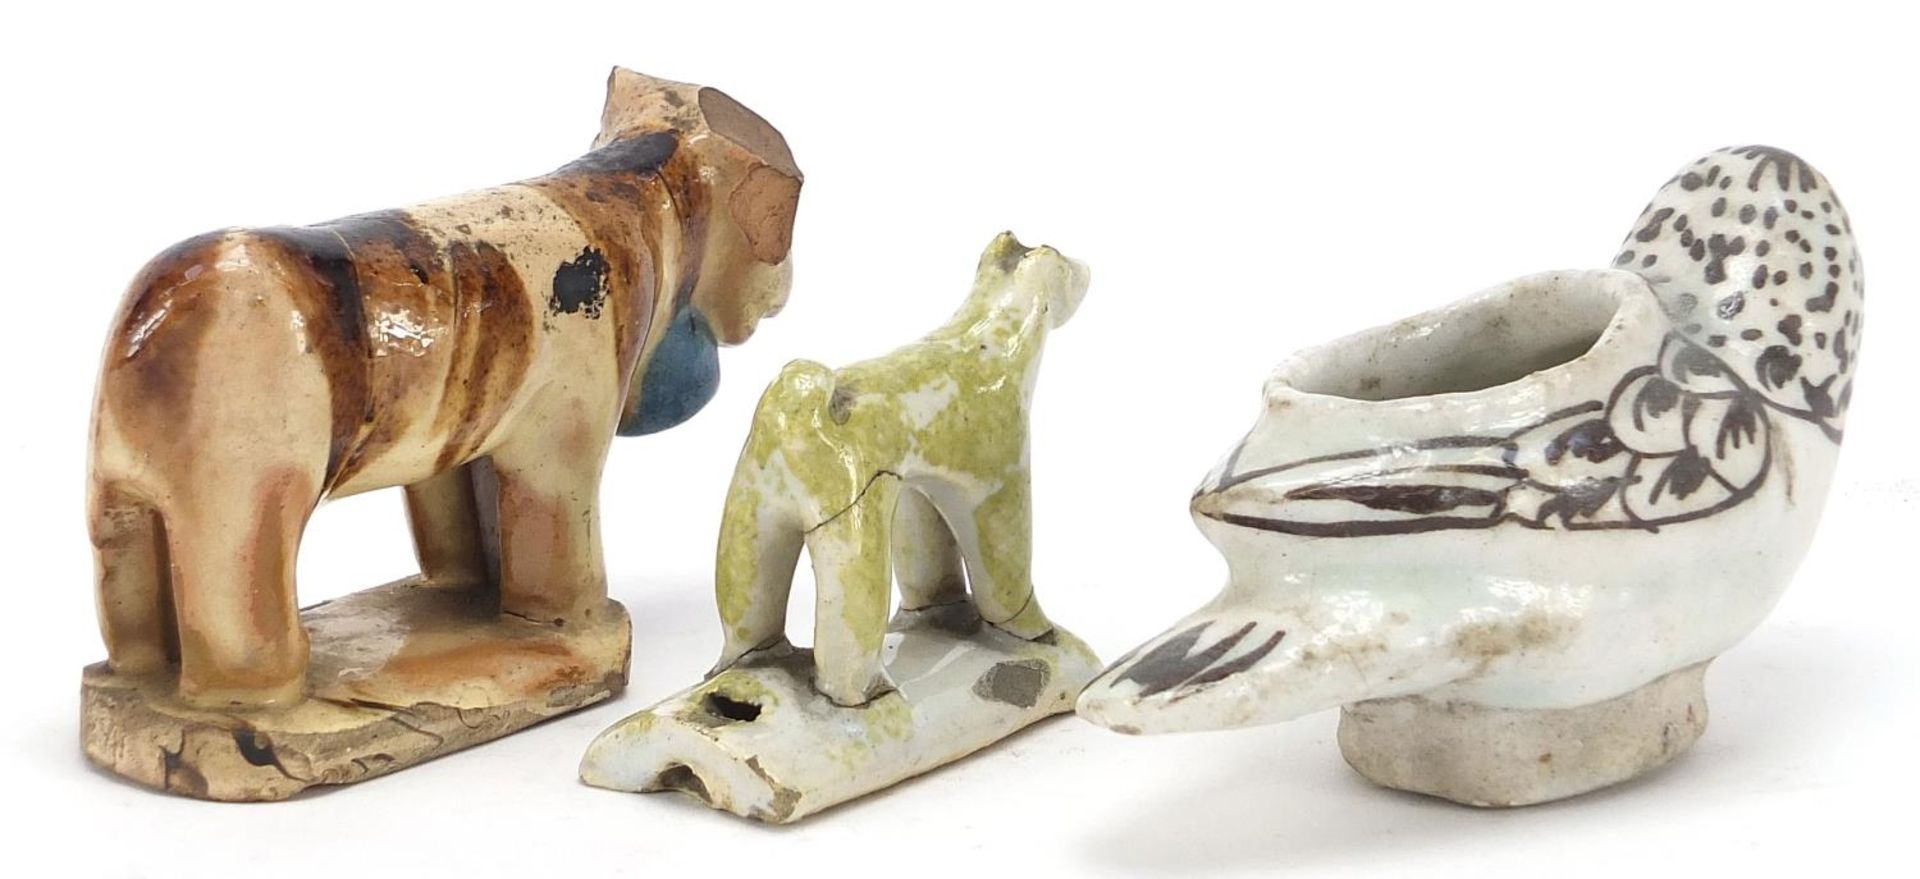 18th century and later ceramics including a dog whistle and cow, the largest 10.5cm in length : - Image 3 of 8